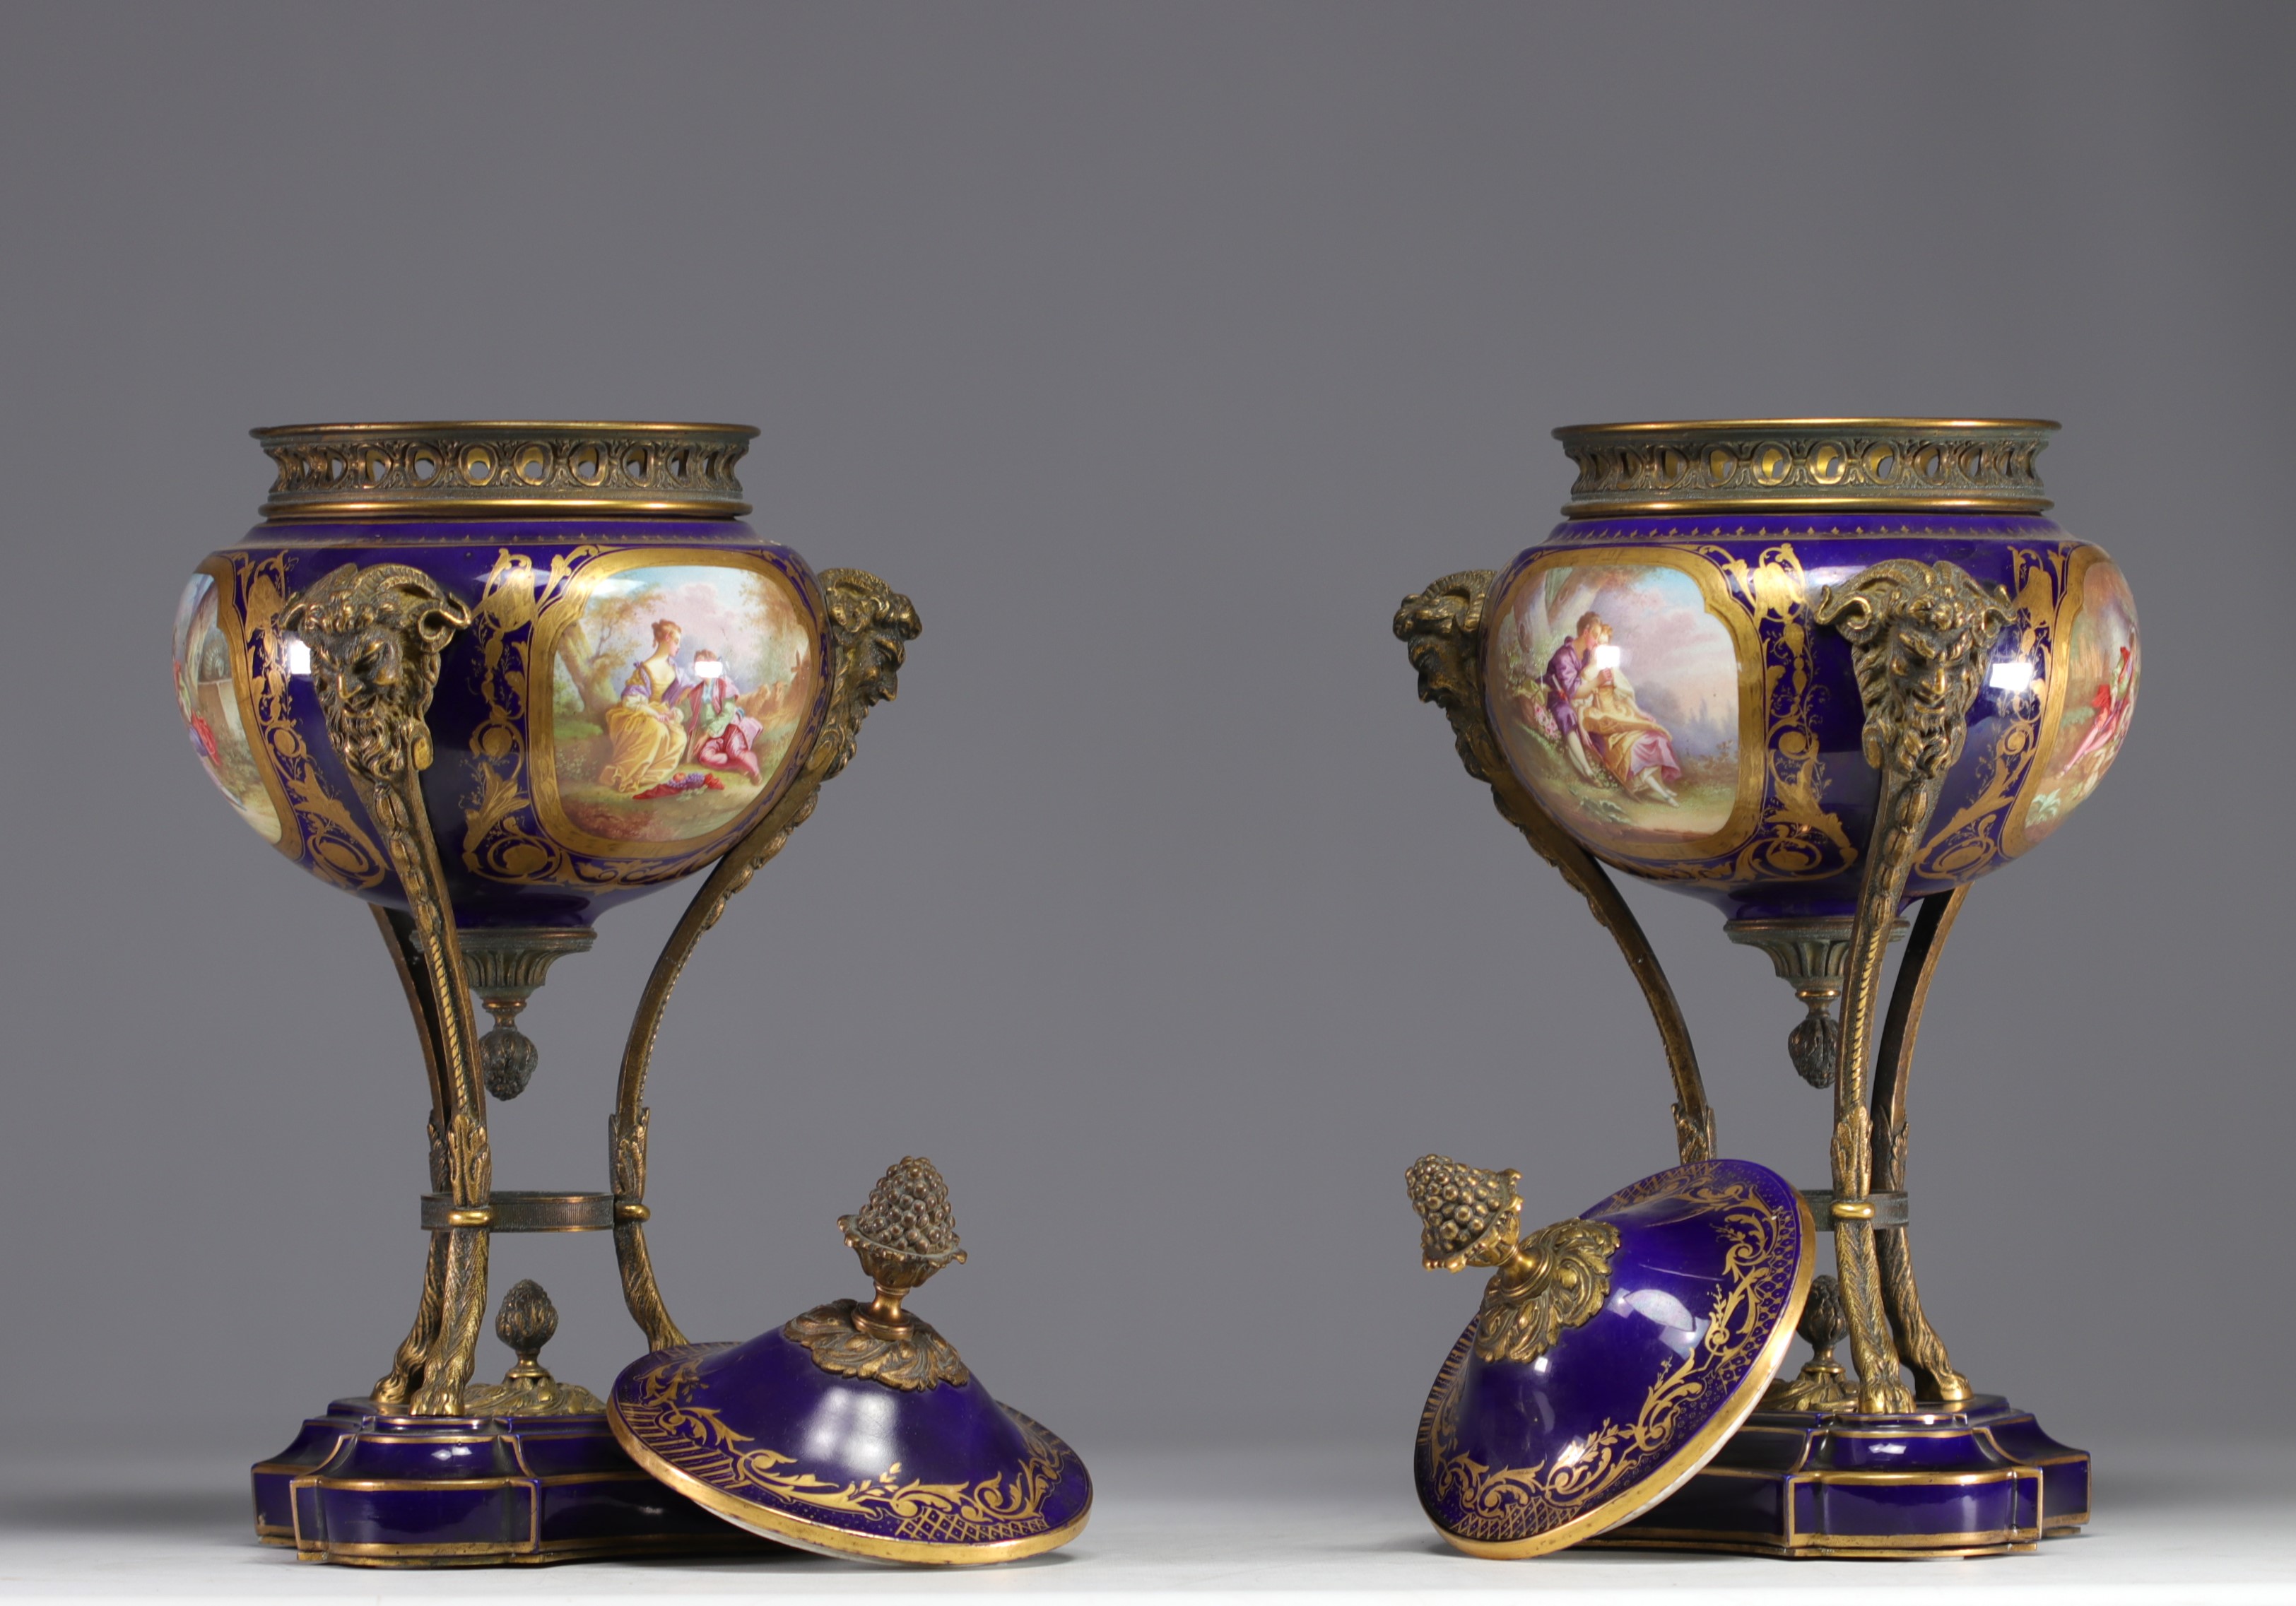 Pair of Sevres porcelain cassolettes decorated with gallant scenes, mounted on bronze. - Image 4 of 5